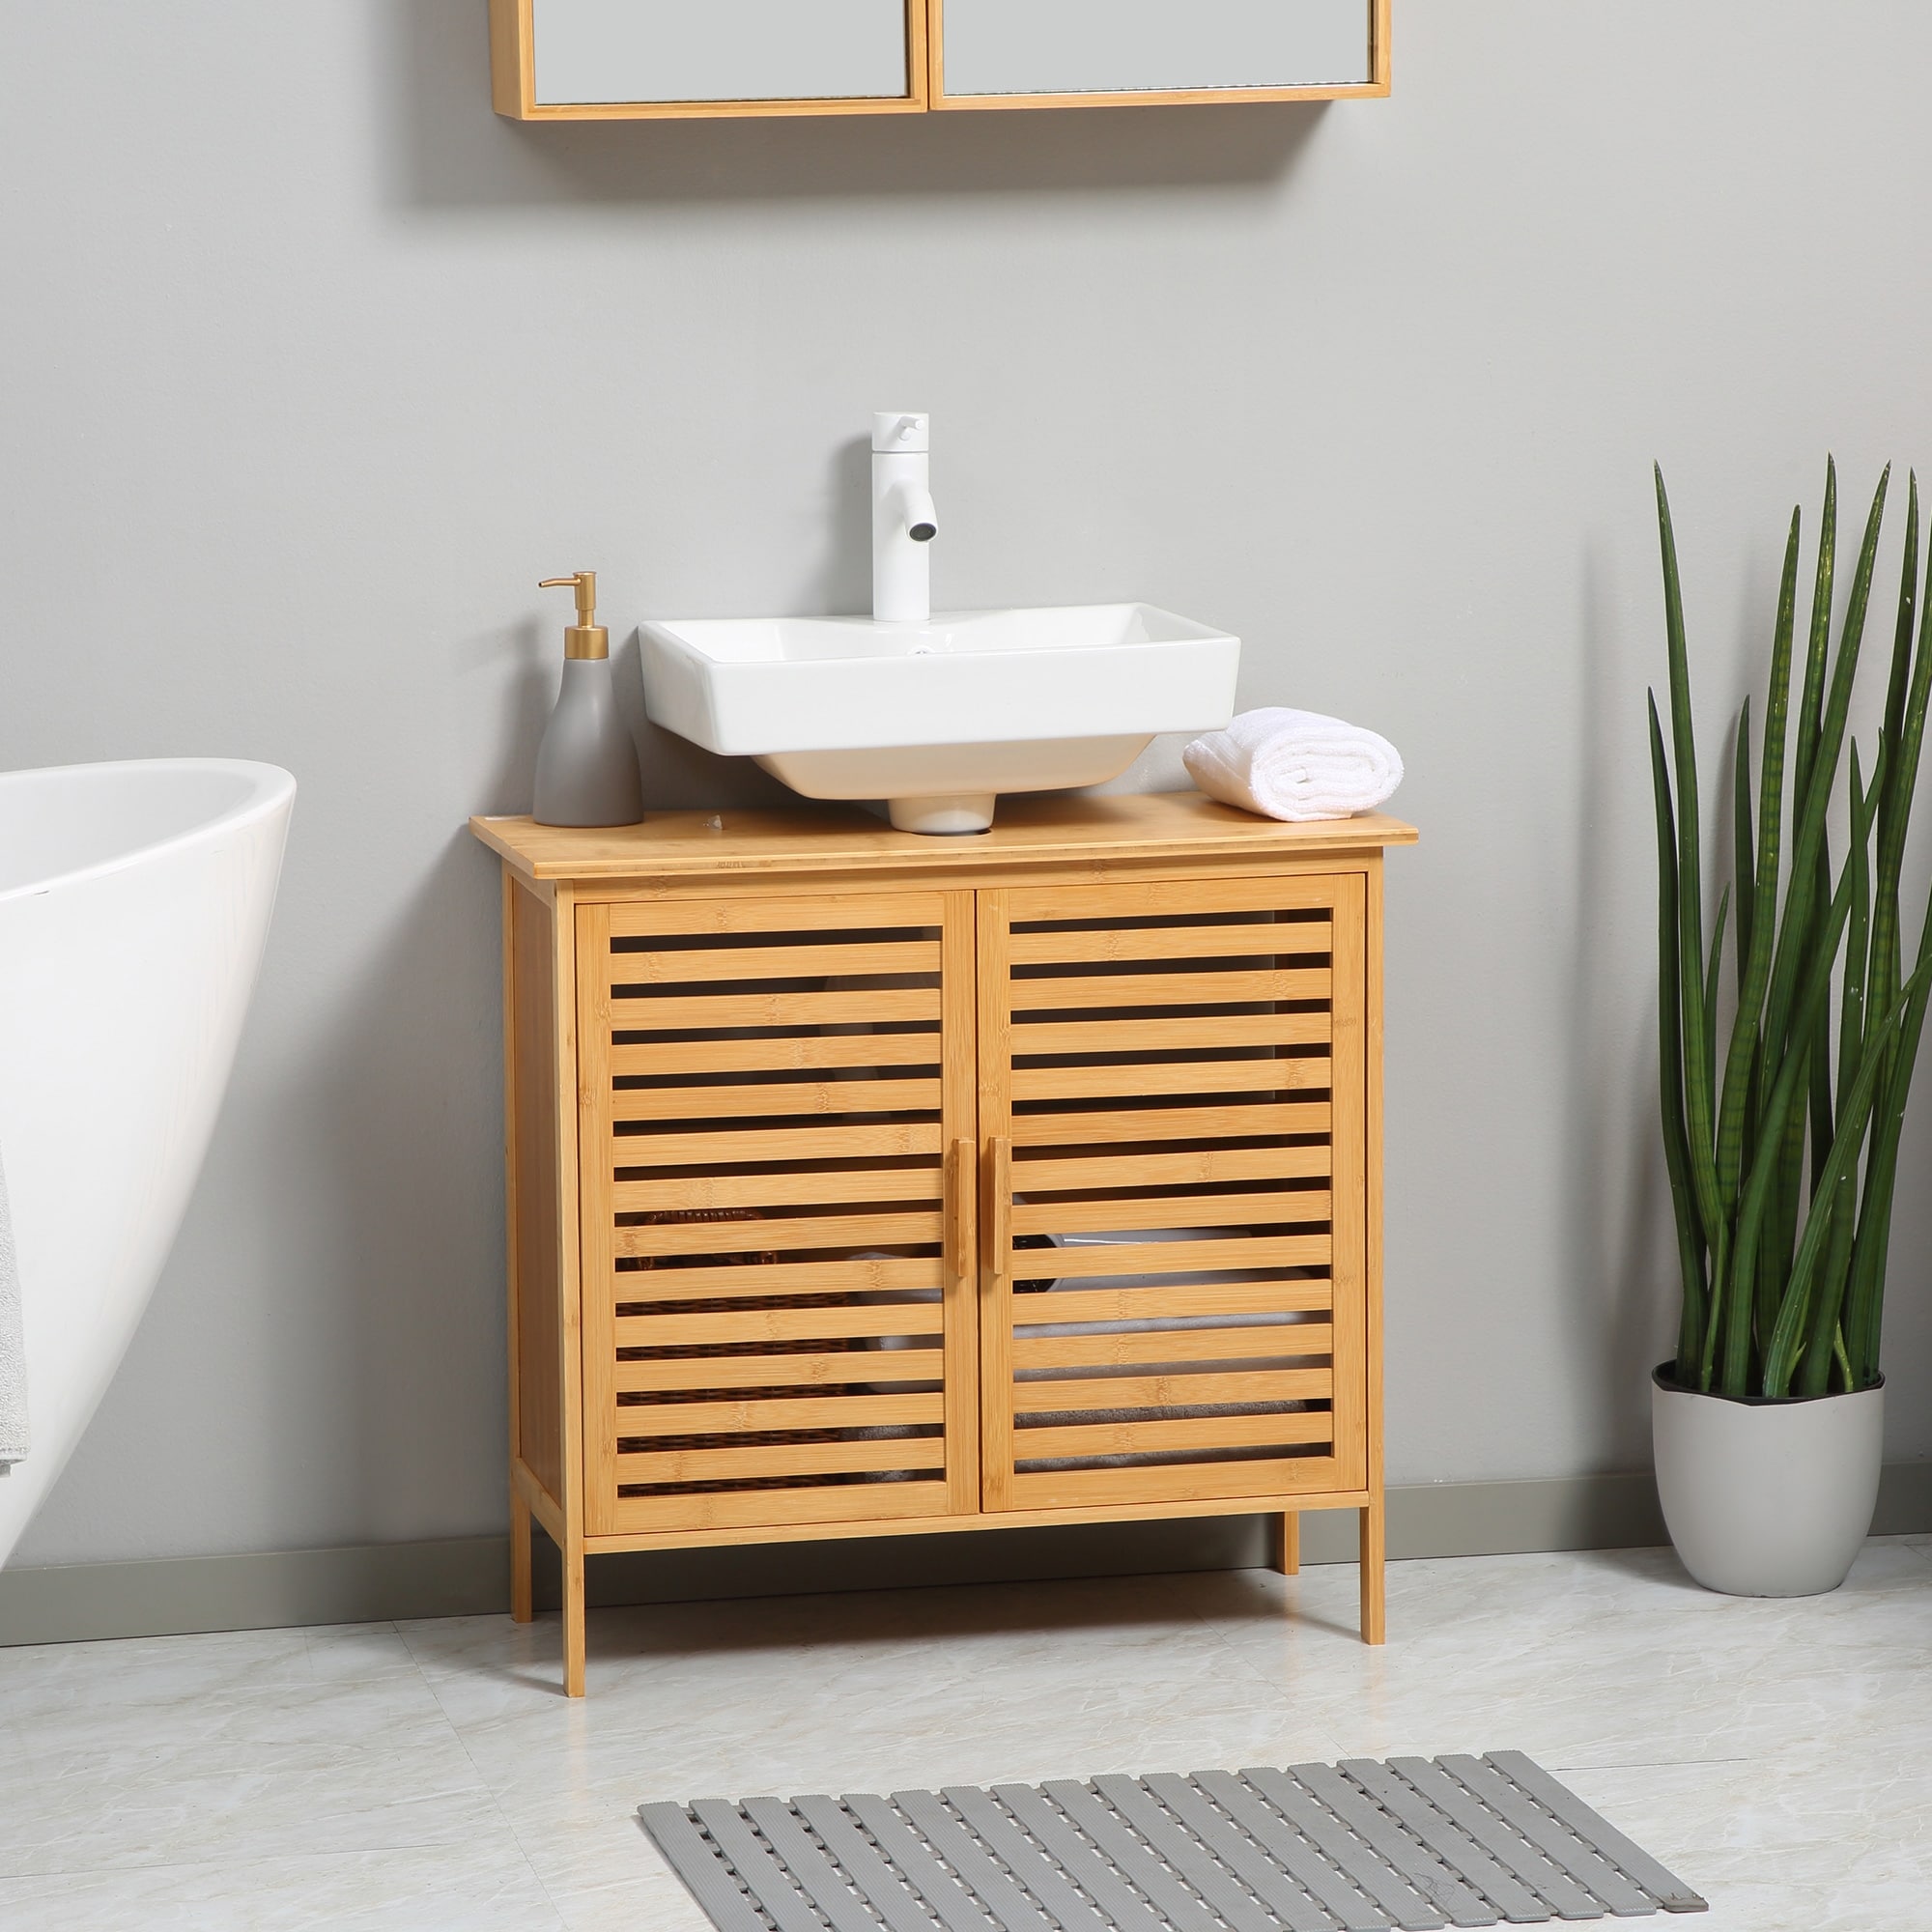 https://ak1.ostkcdn.com/images/products/is/images/direct/c9d052638246f3bbe699e3c5d205434e55faaf1c/Bamboo-Under-Sink-Cabinet-with-2-Slatted-Doors%2C-Freestanding-Bathroom-Sink-Cabinet-Space-Saver-Organizer.jpg